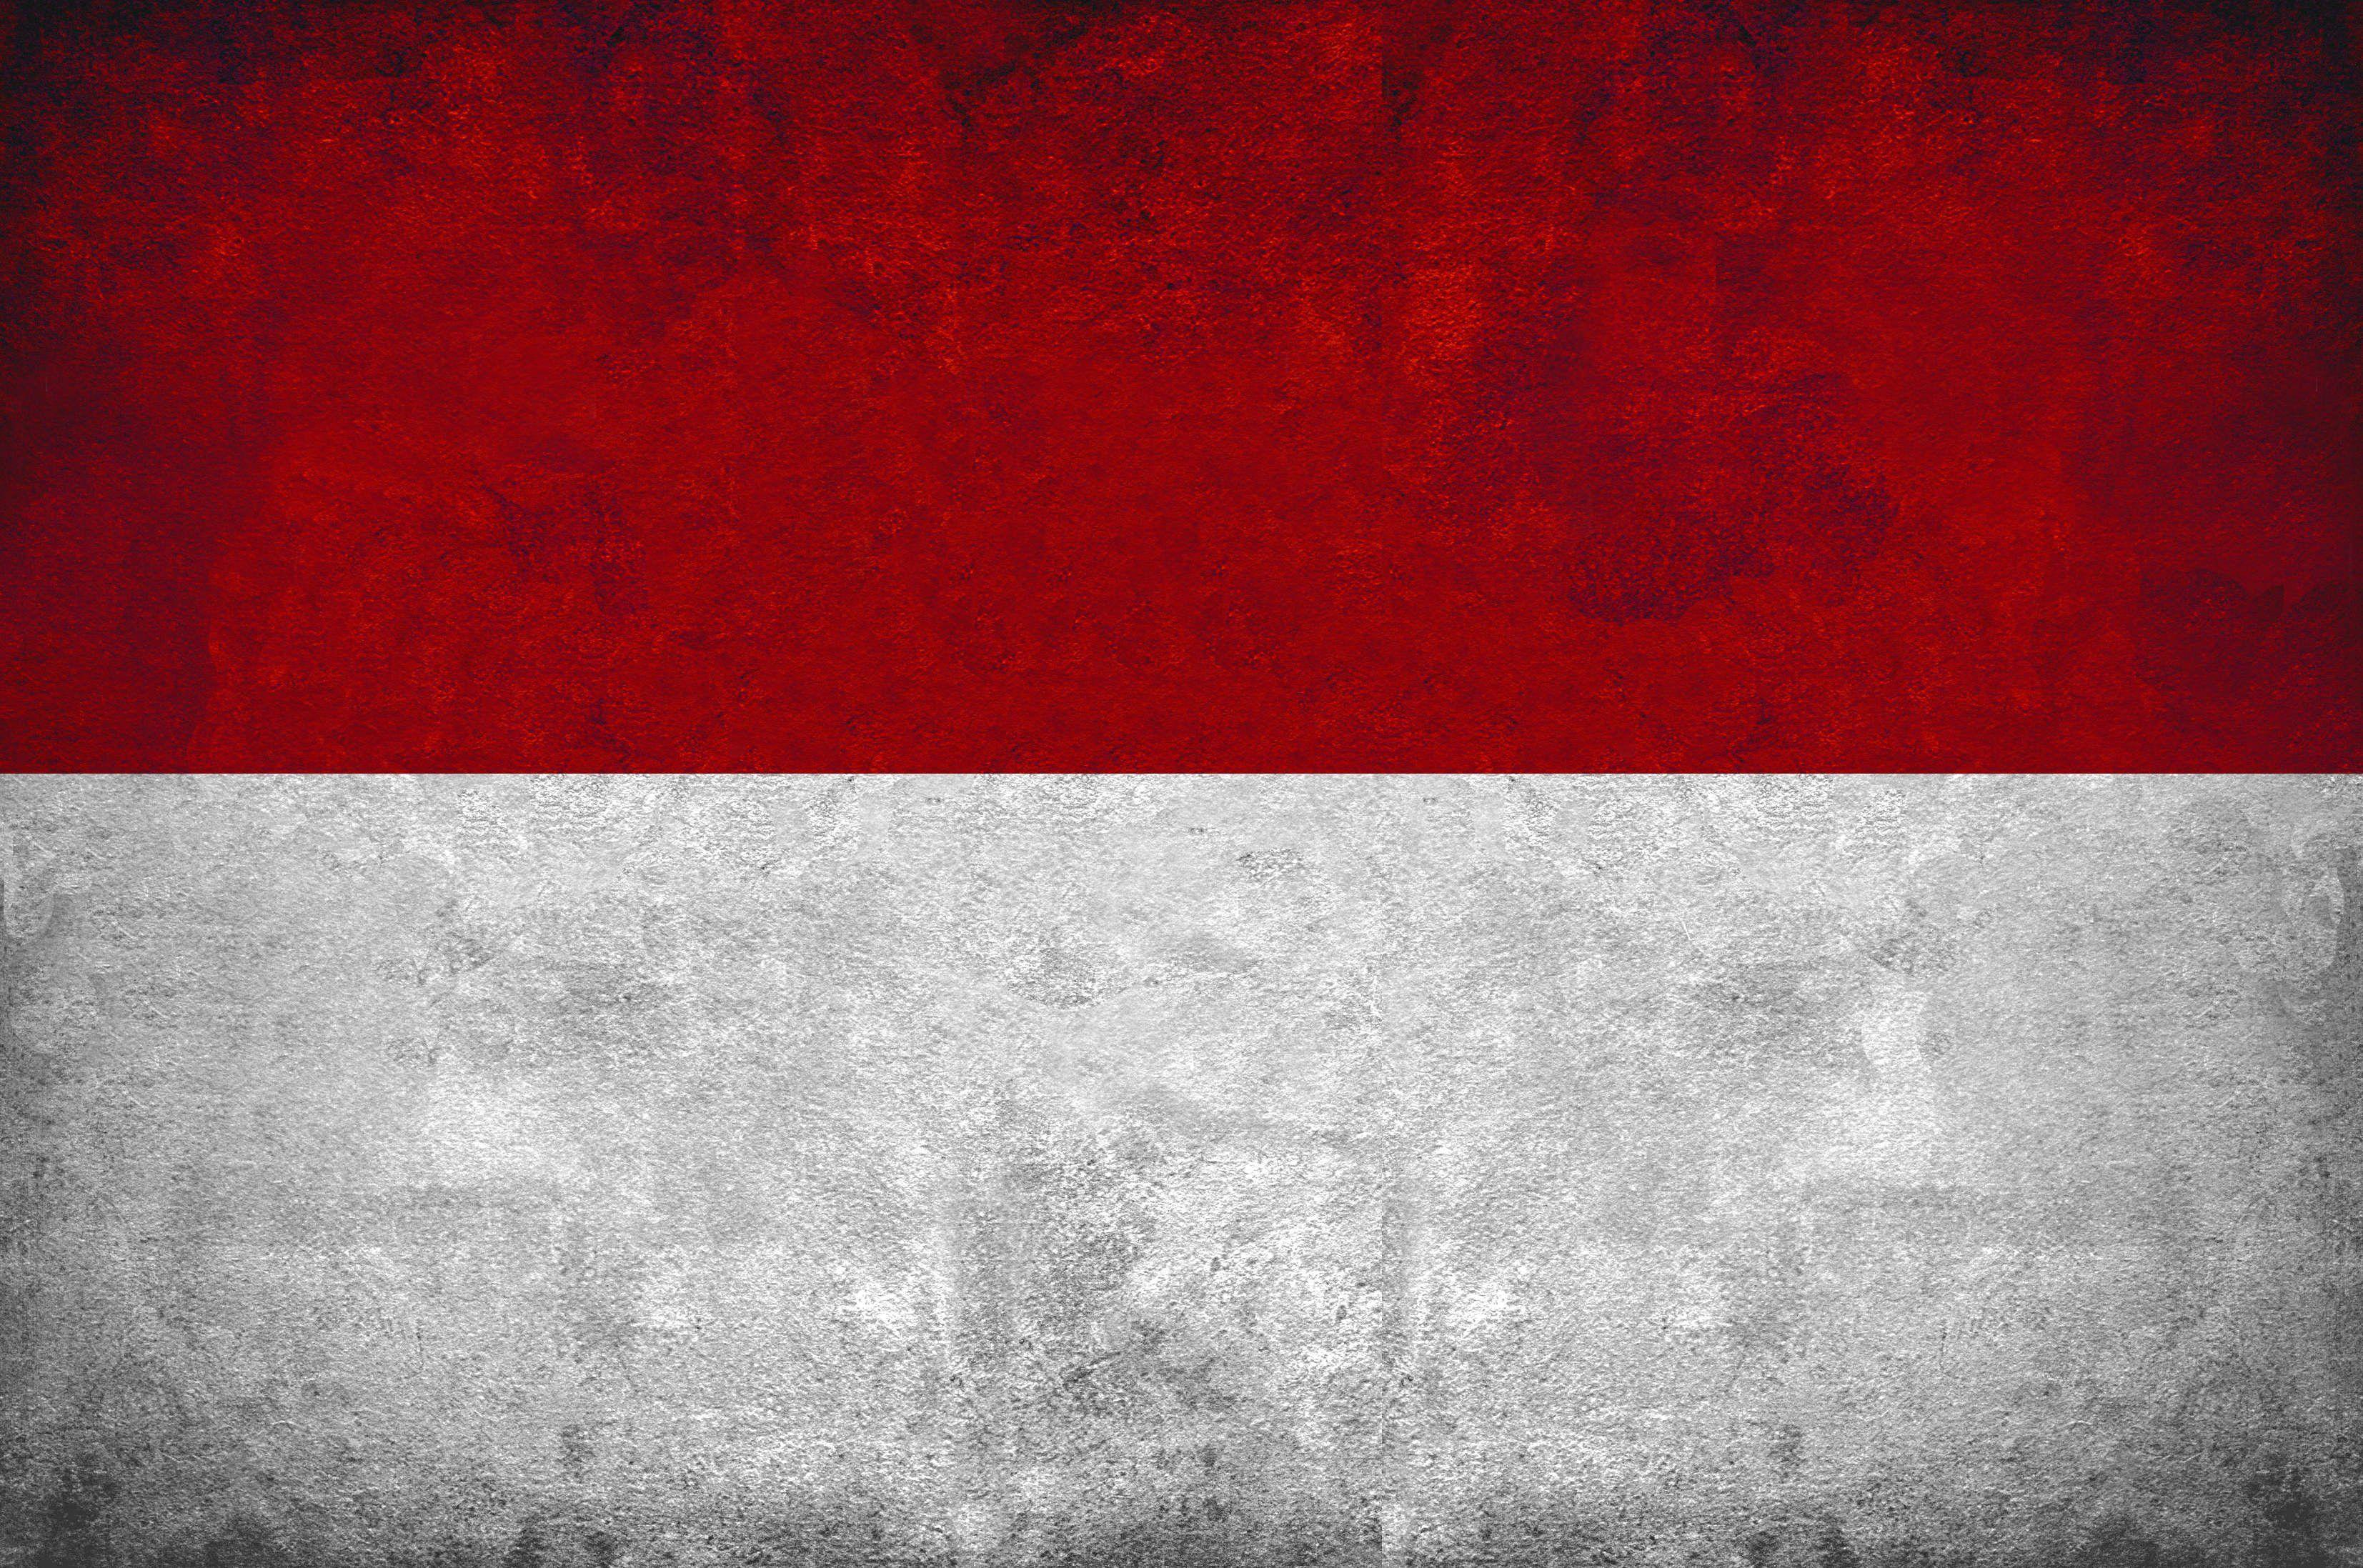 INDONESIAN FLAG indonesia flags wallpaperx2195